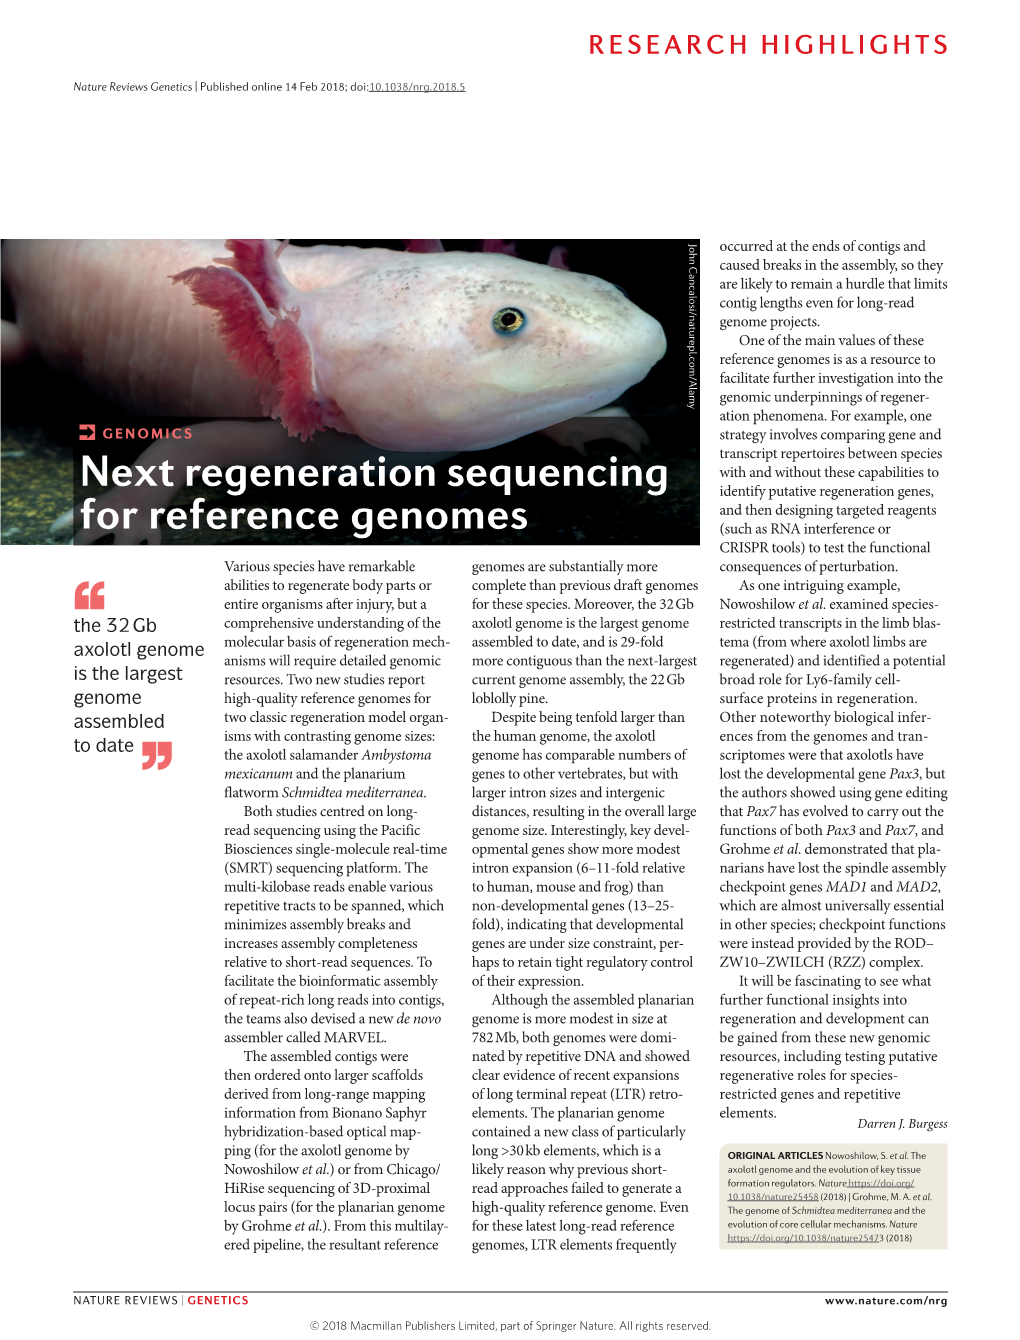 Next Regeneration Sequencing for Reference Genomes